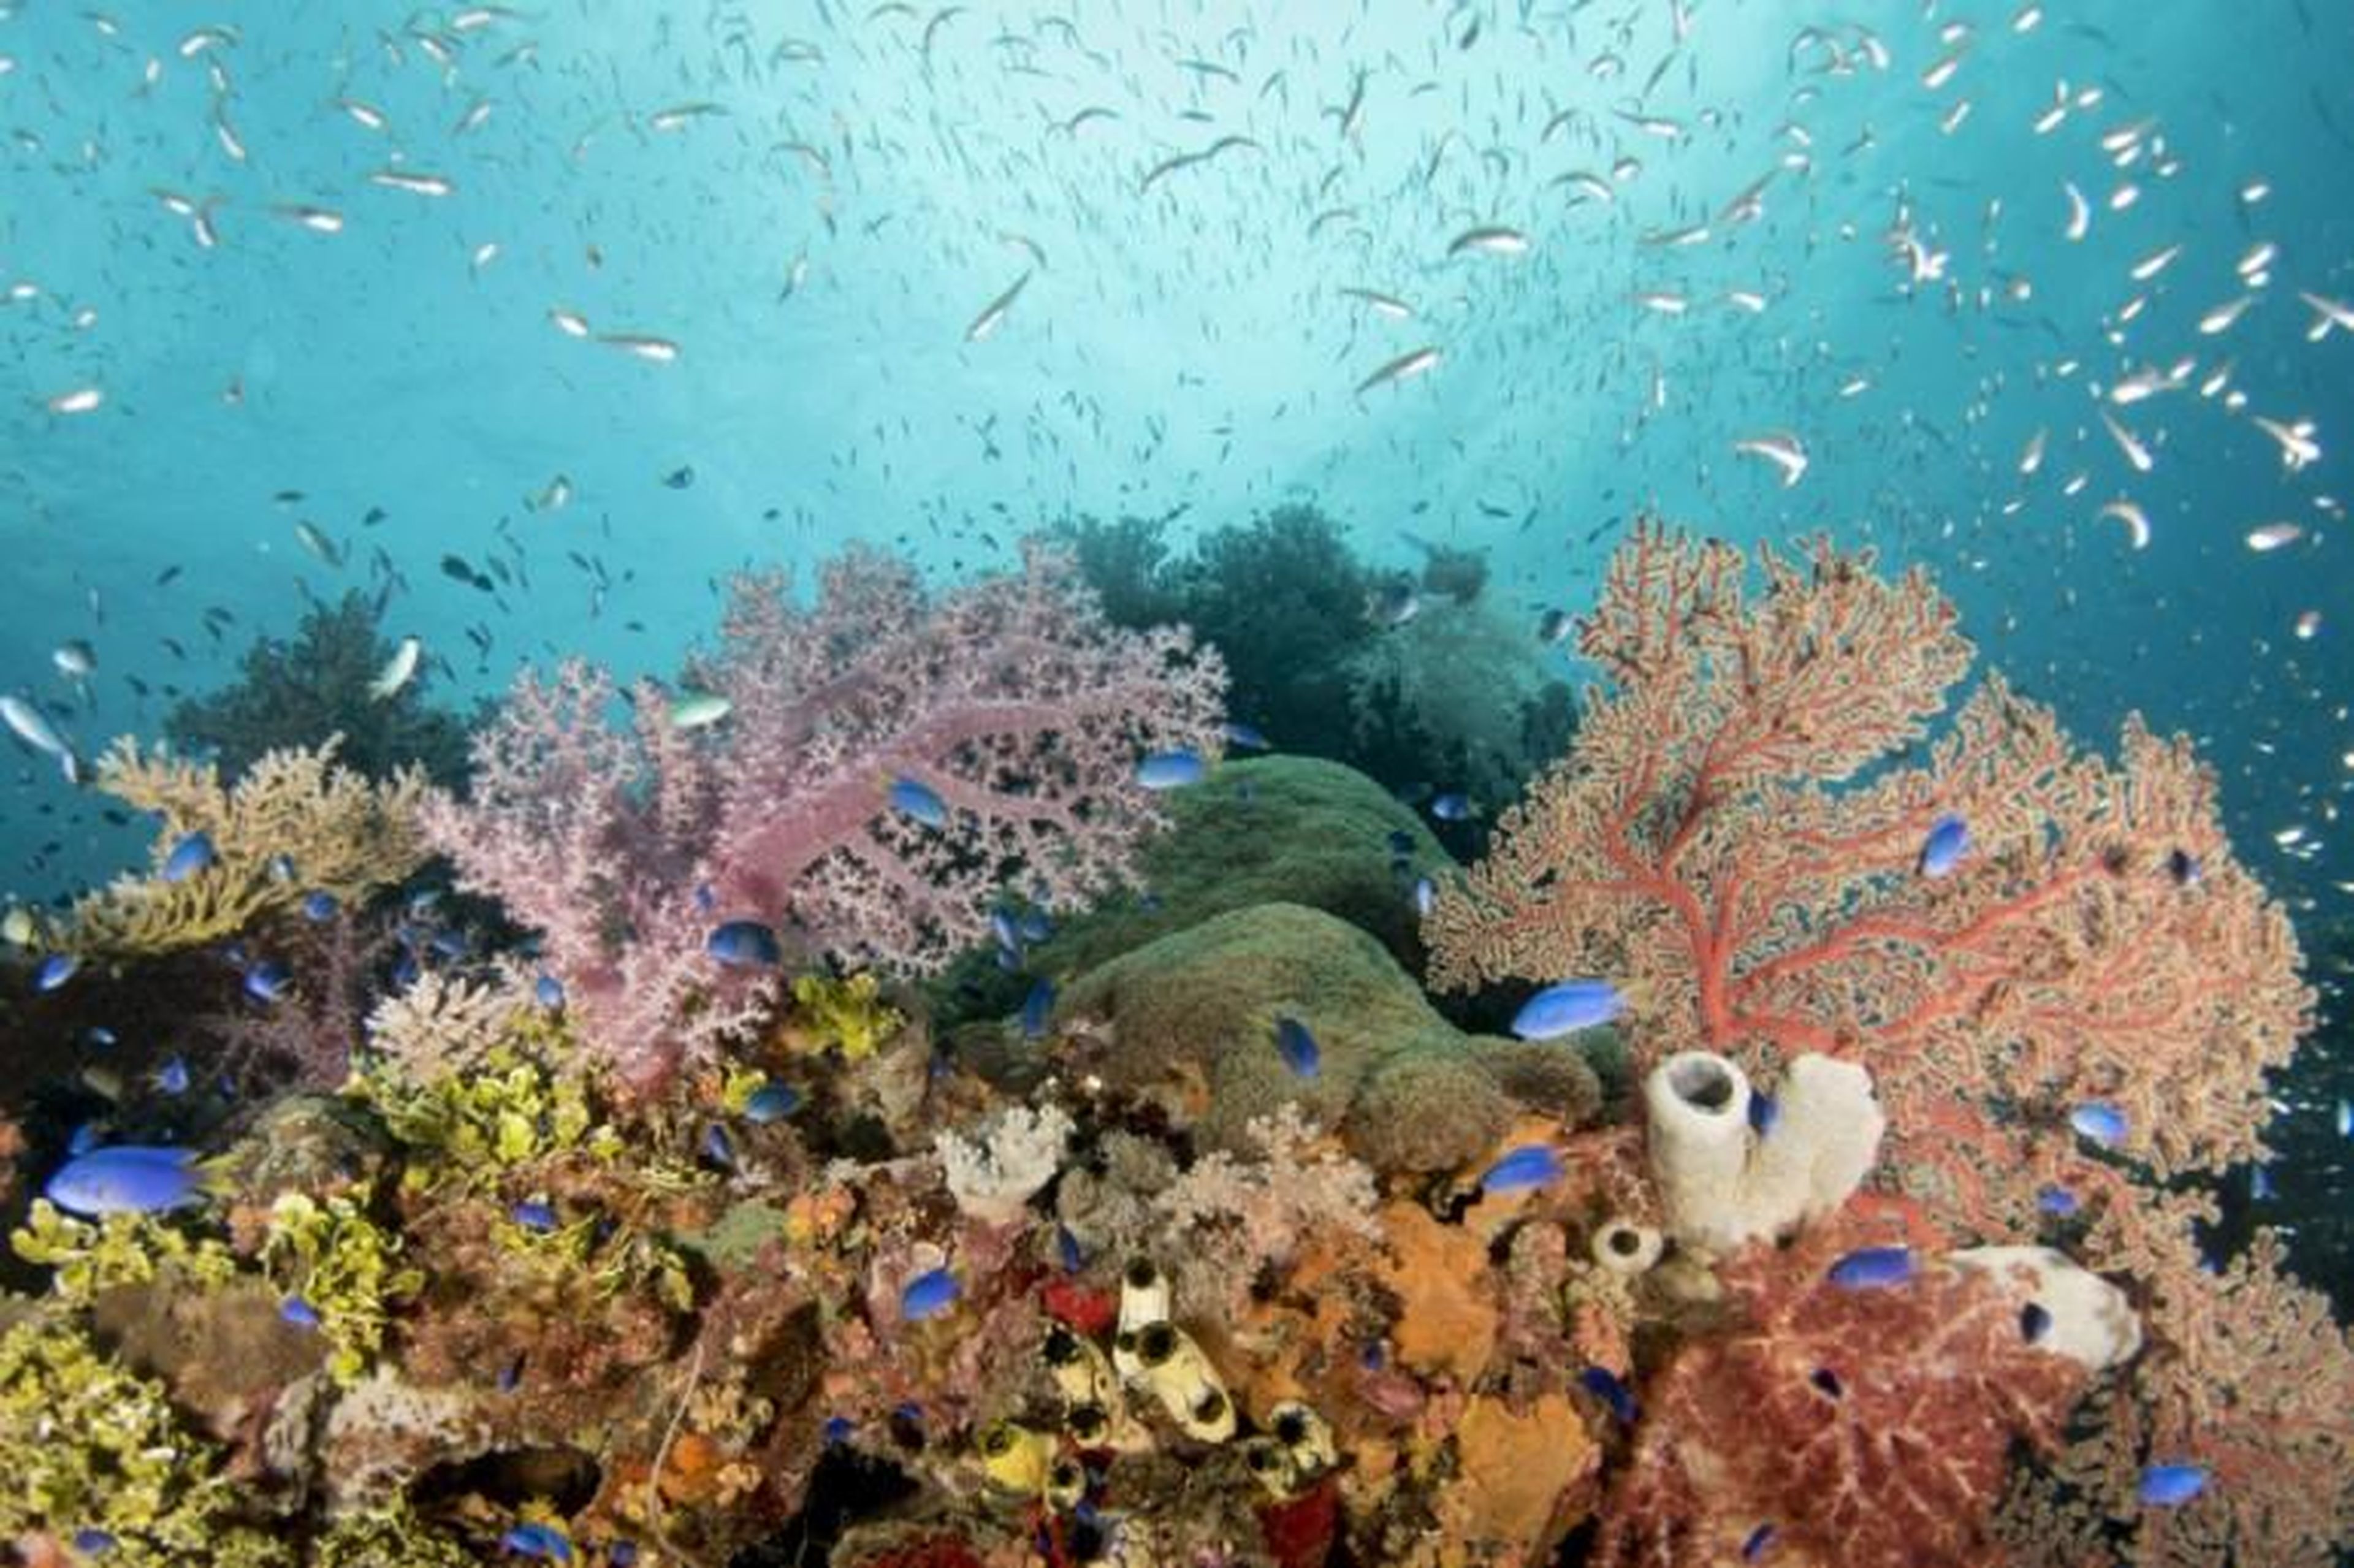 Oceans also absorb more than one-third of the carbon dioxide in the atmosphere, which causes them to become more acidic. We are already seeing the effects of that elevated acidity in the form of coral bleaching.